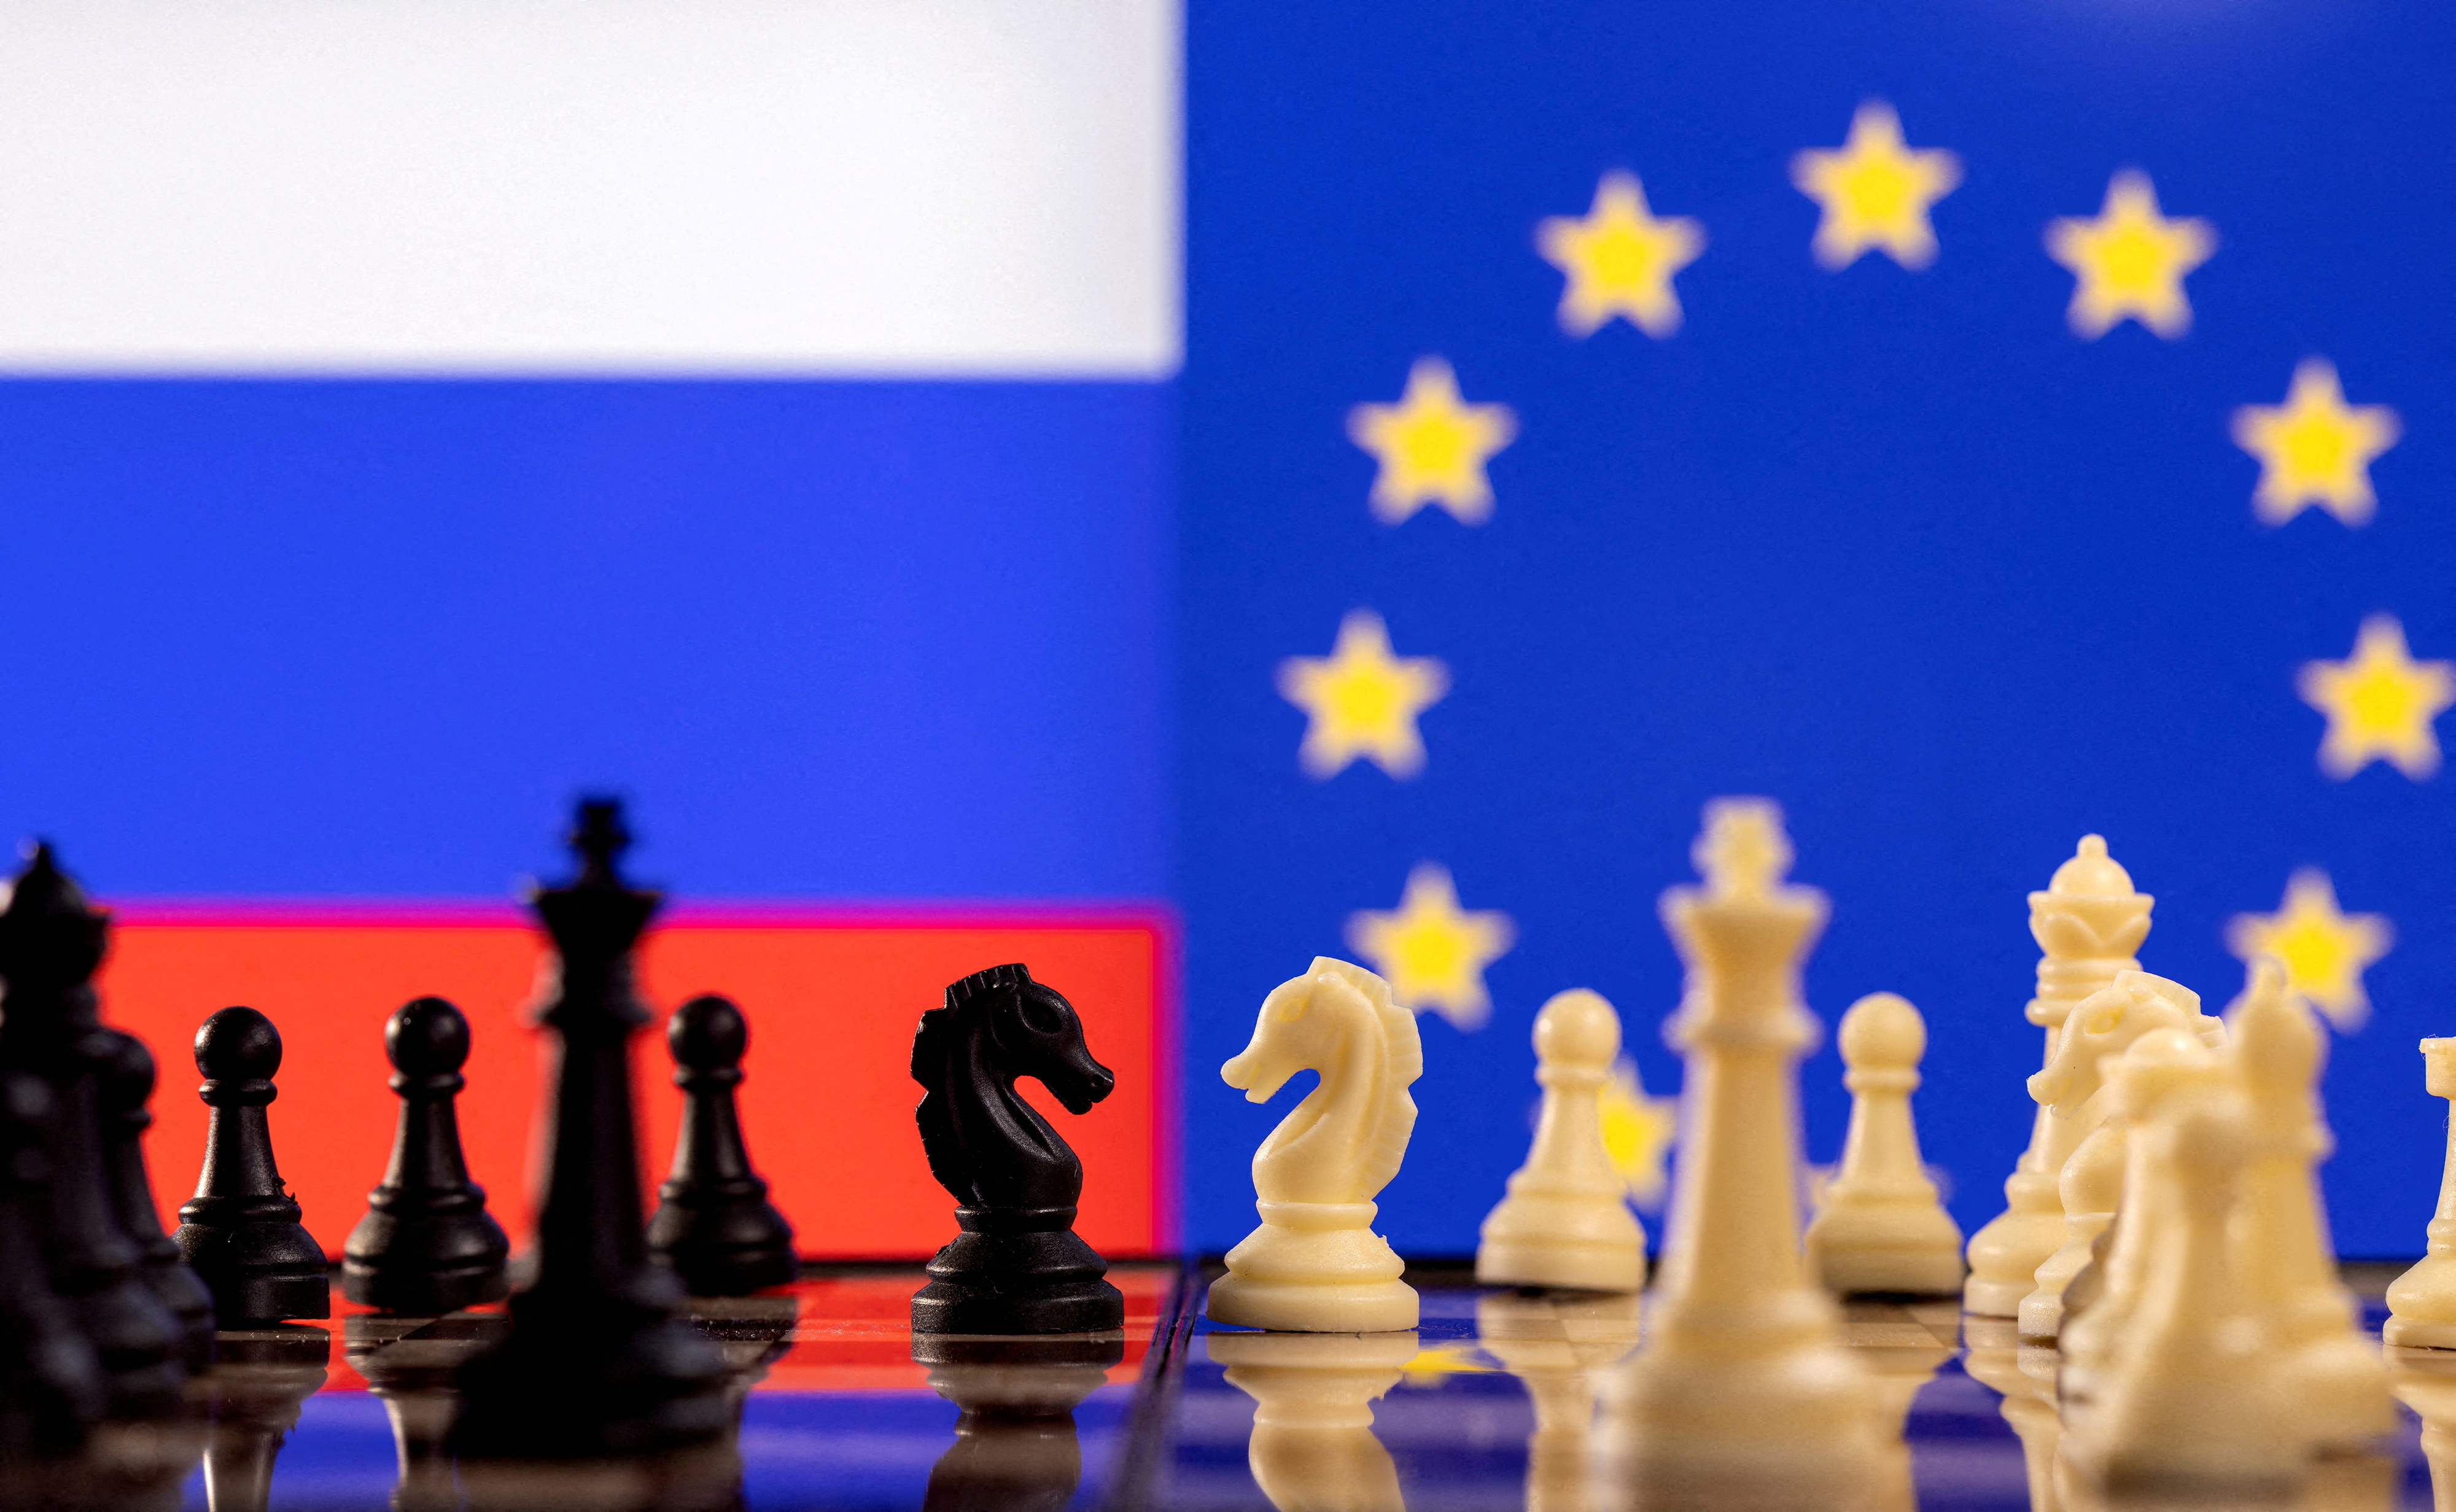 Moscow will host the Chess Olympiad 2022, Budapest will host the Chess  Olympiad 2024